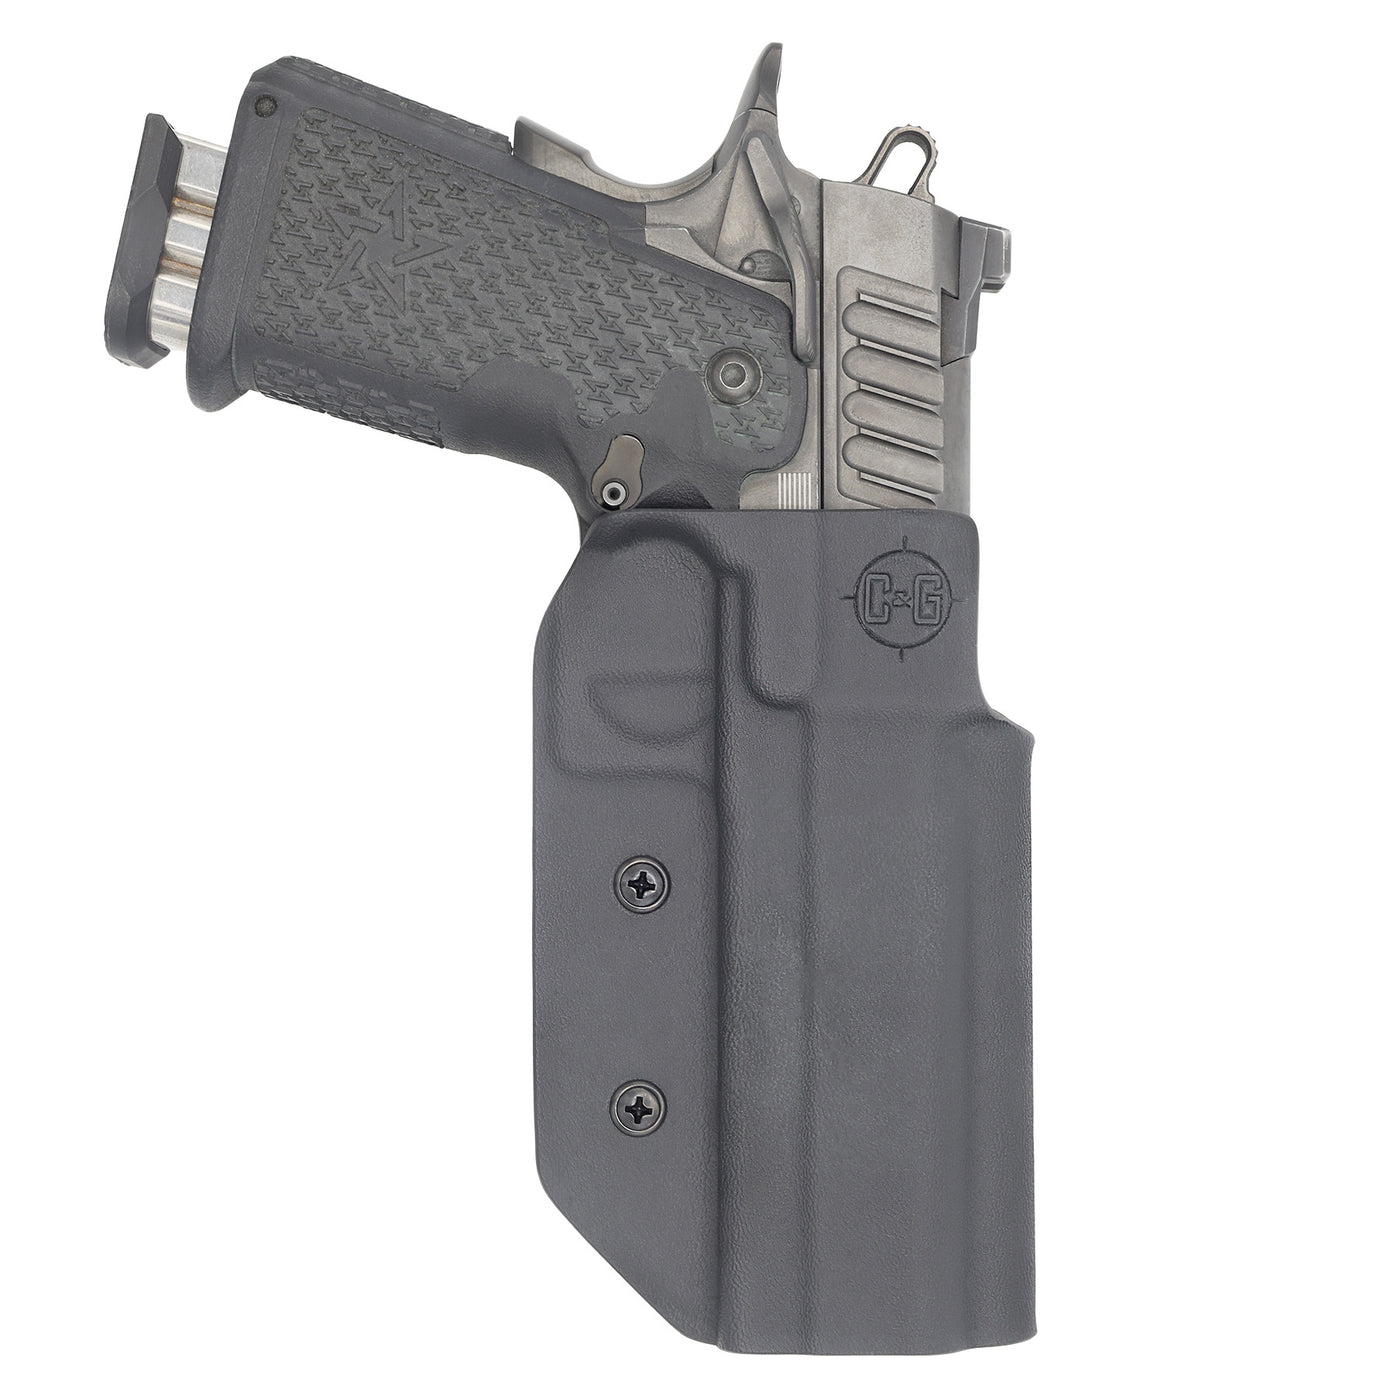 C&G Holsters Competition Starter Kit that is IDPA, USPSA & 3-GUN legal for 2011 in holstered position